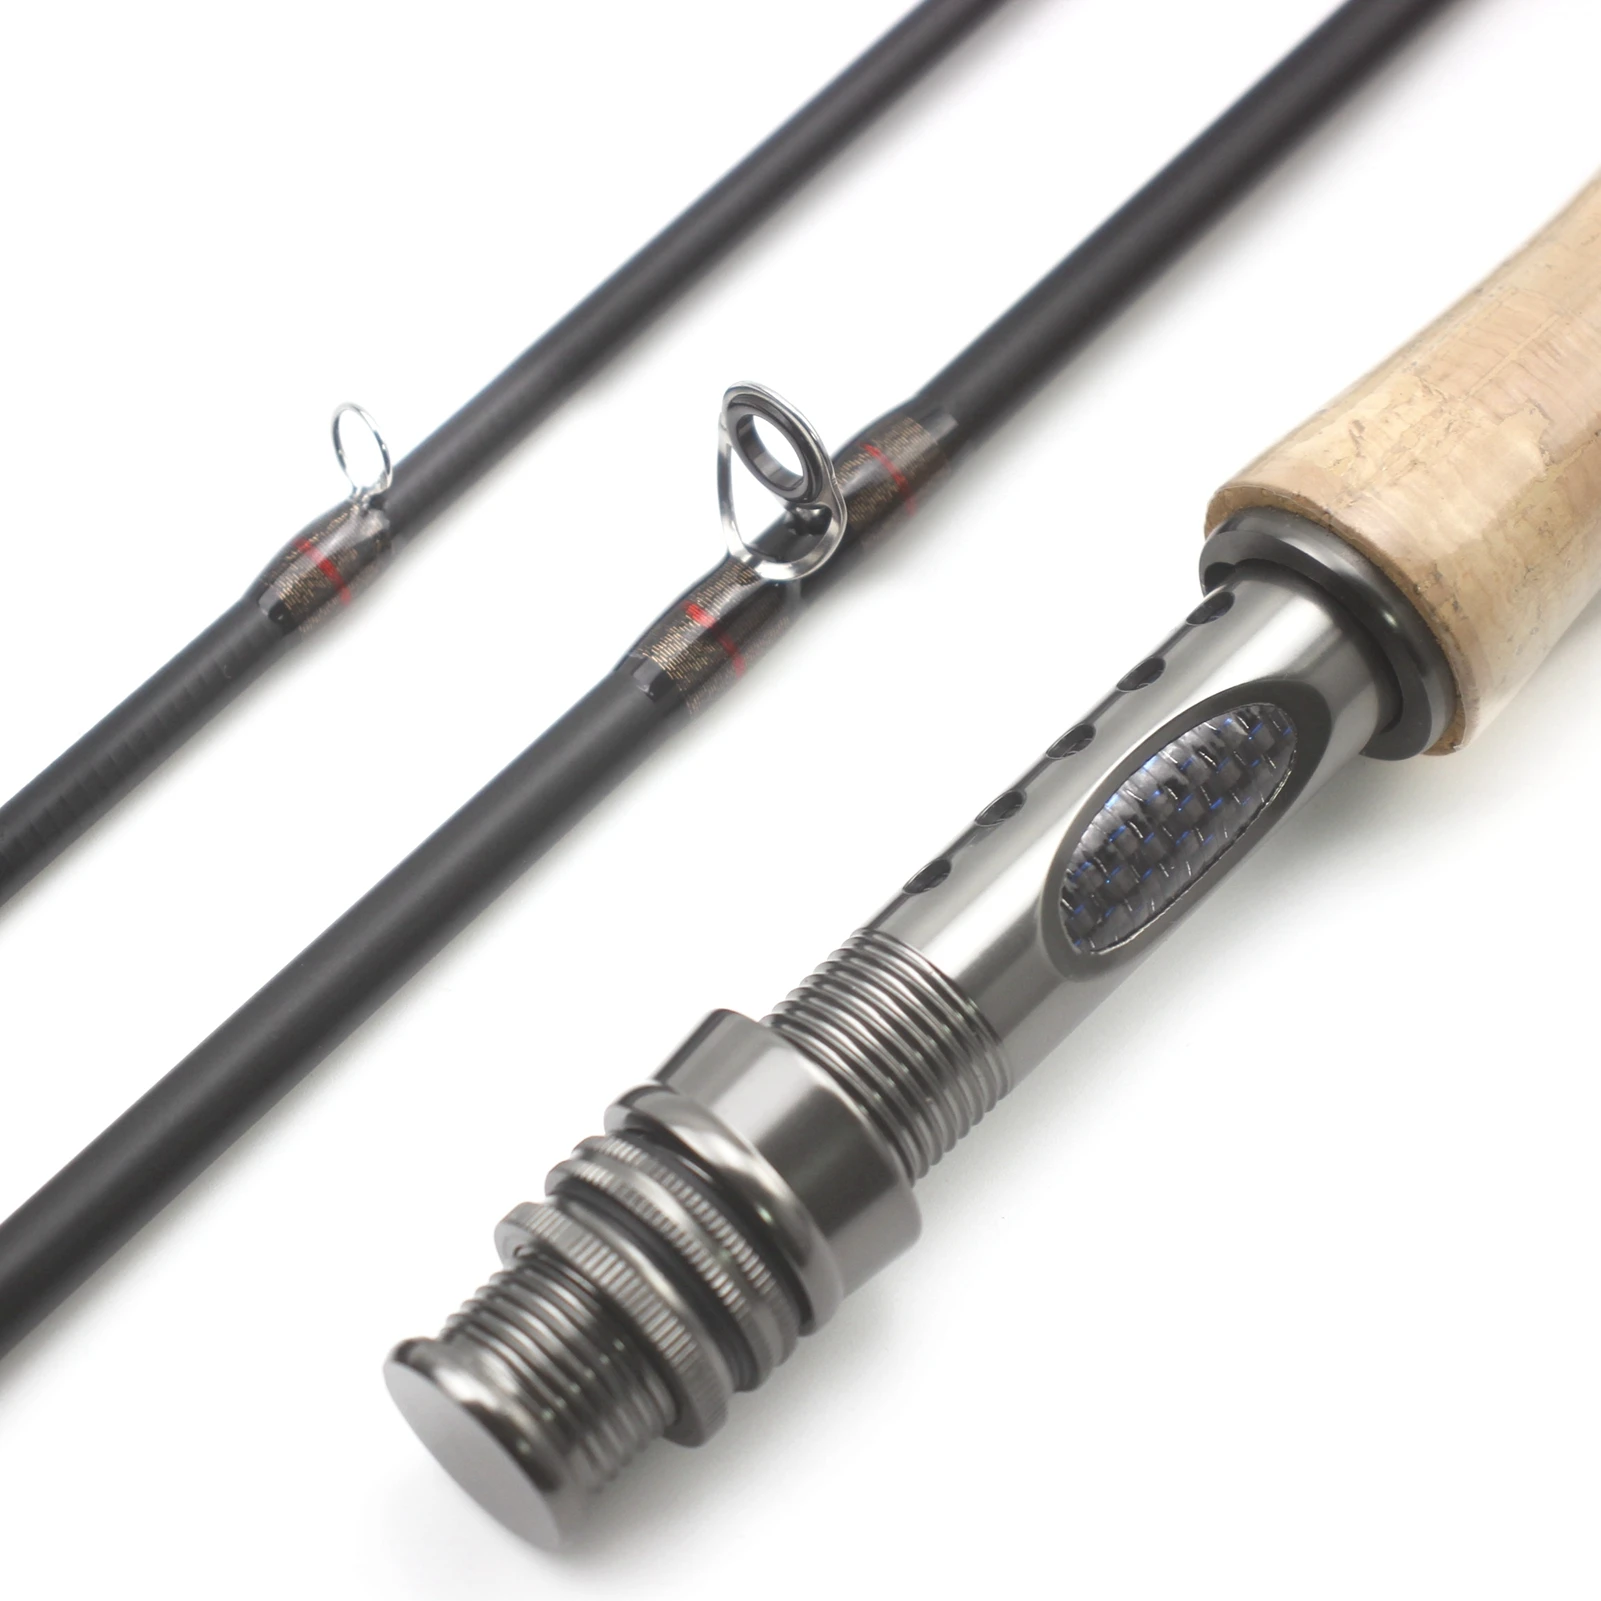 8ft 9ft 4 Section Fly Fishing Rod Portable Carbon UltraLight Slow Action  Fly Rod Cork Handle Lure Fishing Tackle Free Shipping